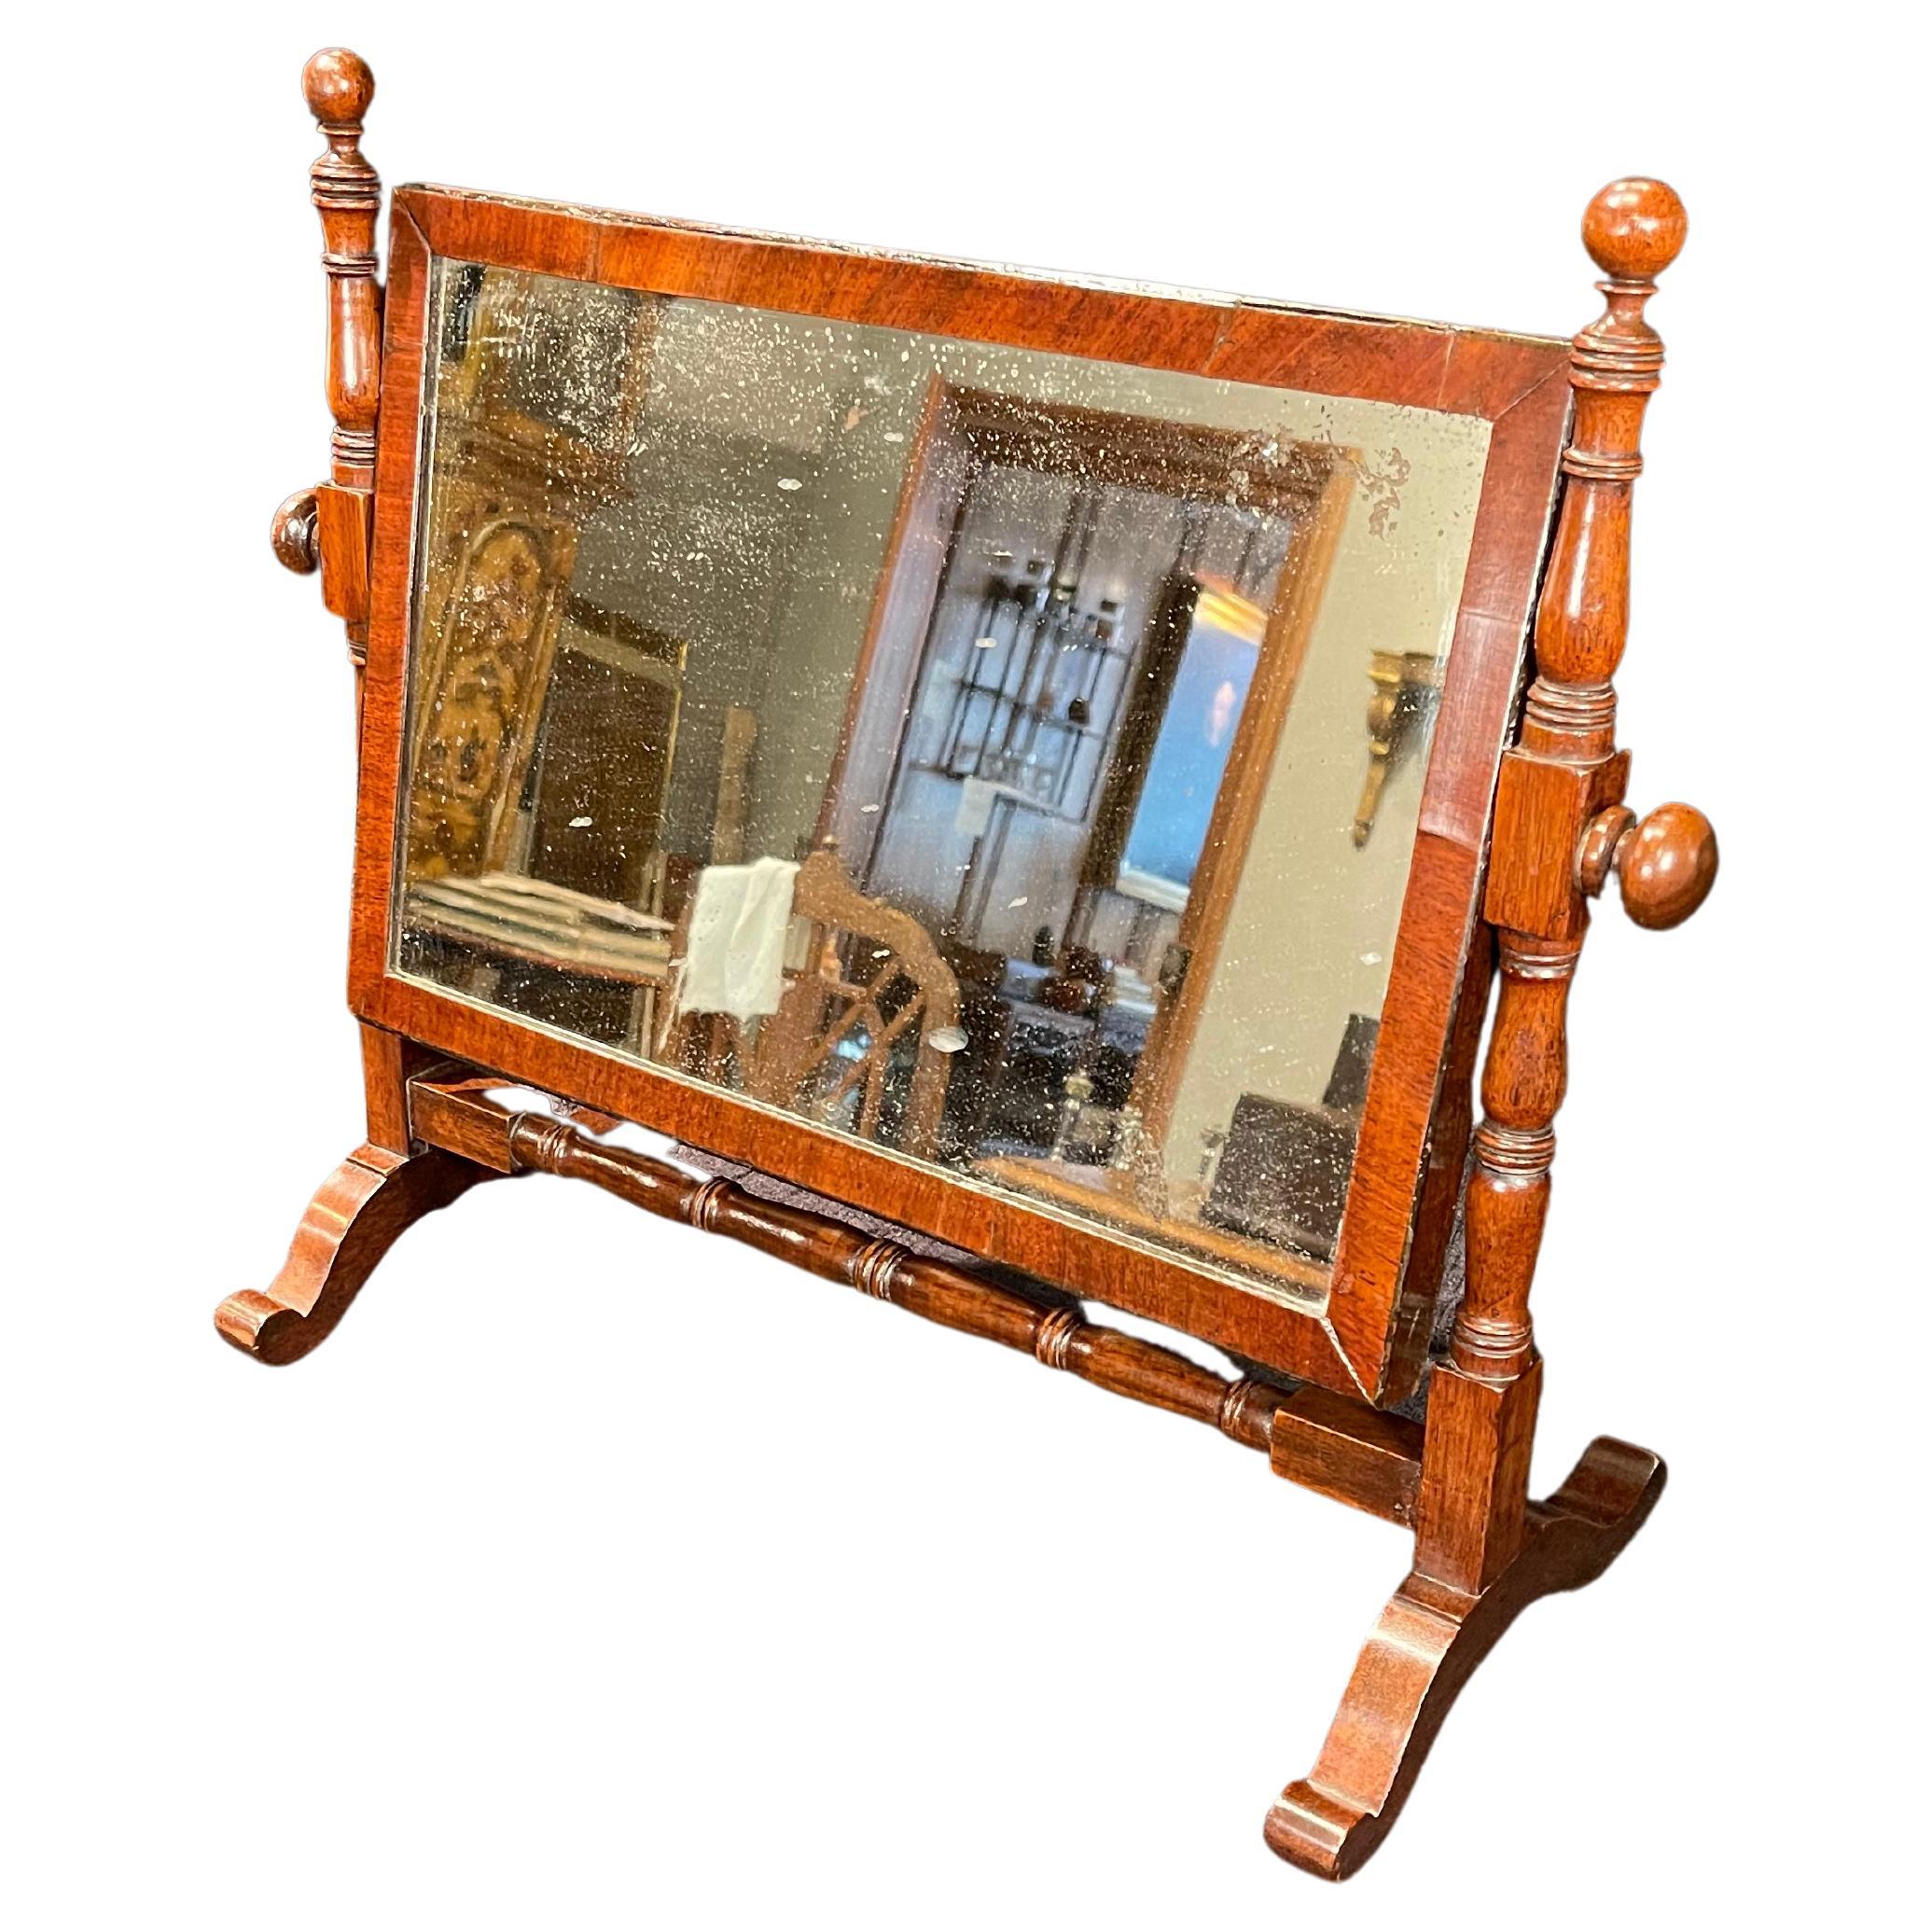 Mahogany Tilting Dressing Mirror , the mirror on a turned frame. Mirror tilts to desired position. The antique frame with period mirror lightly antiqued in appearance. The stand is topped with ball finials & knobs.